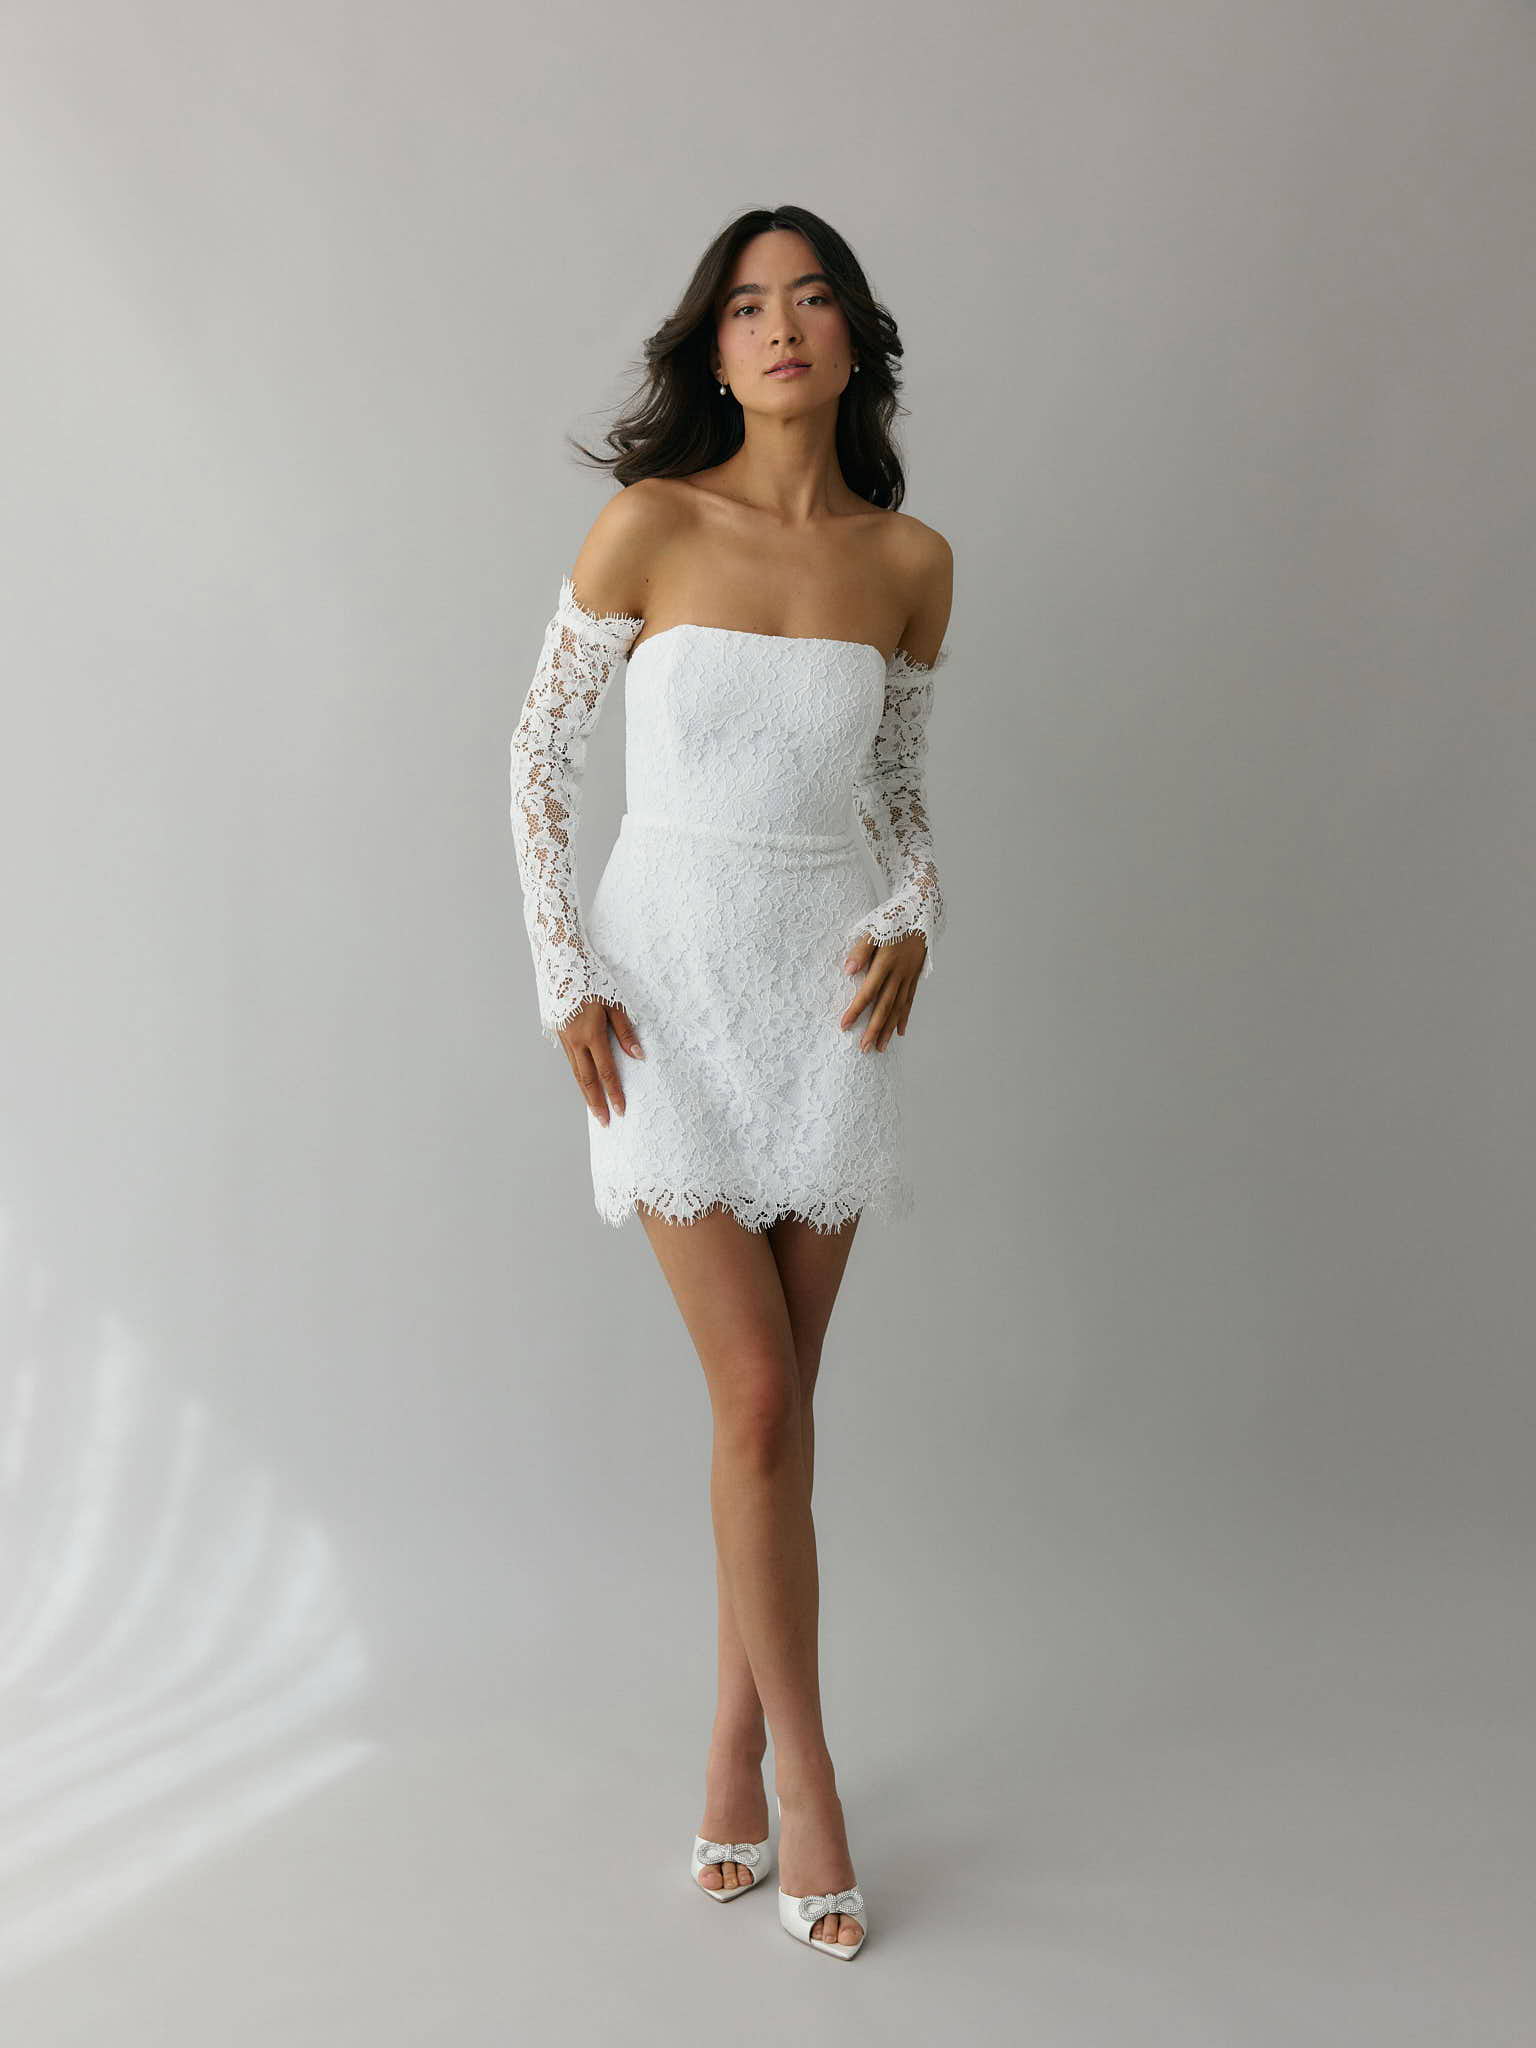 Girl wearing strapless white lace mini bridal event dress with lace sleeves.